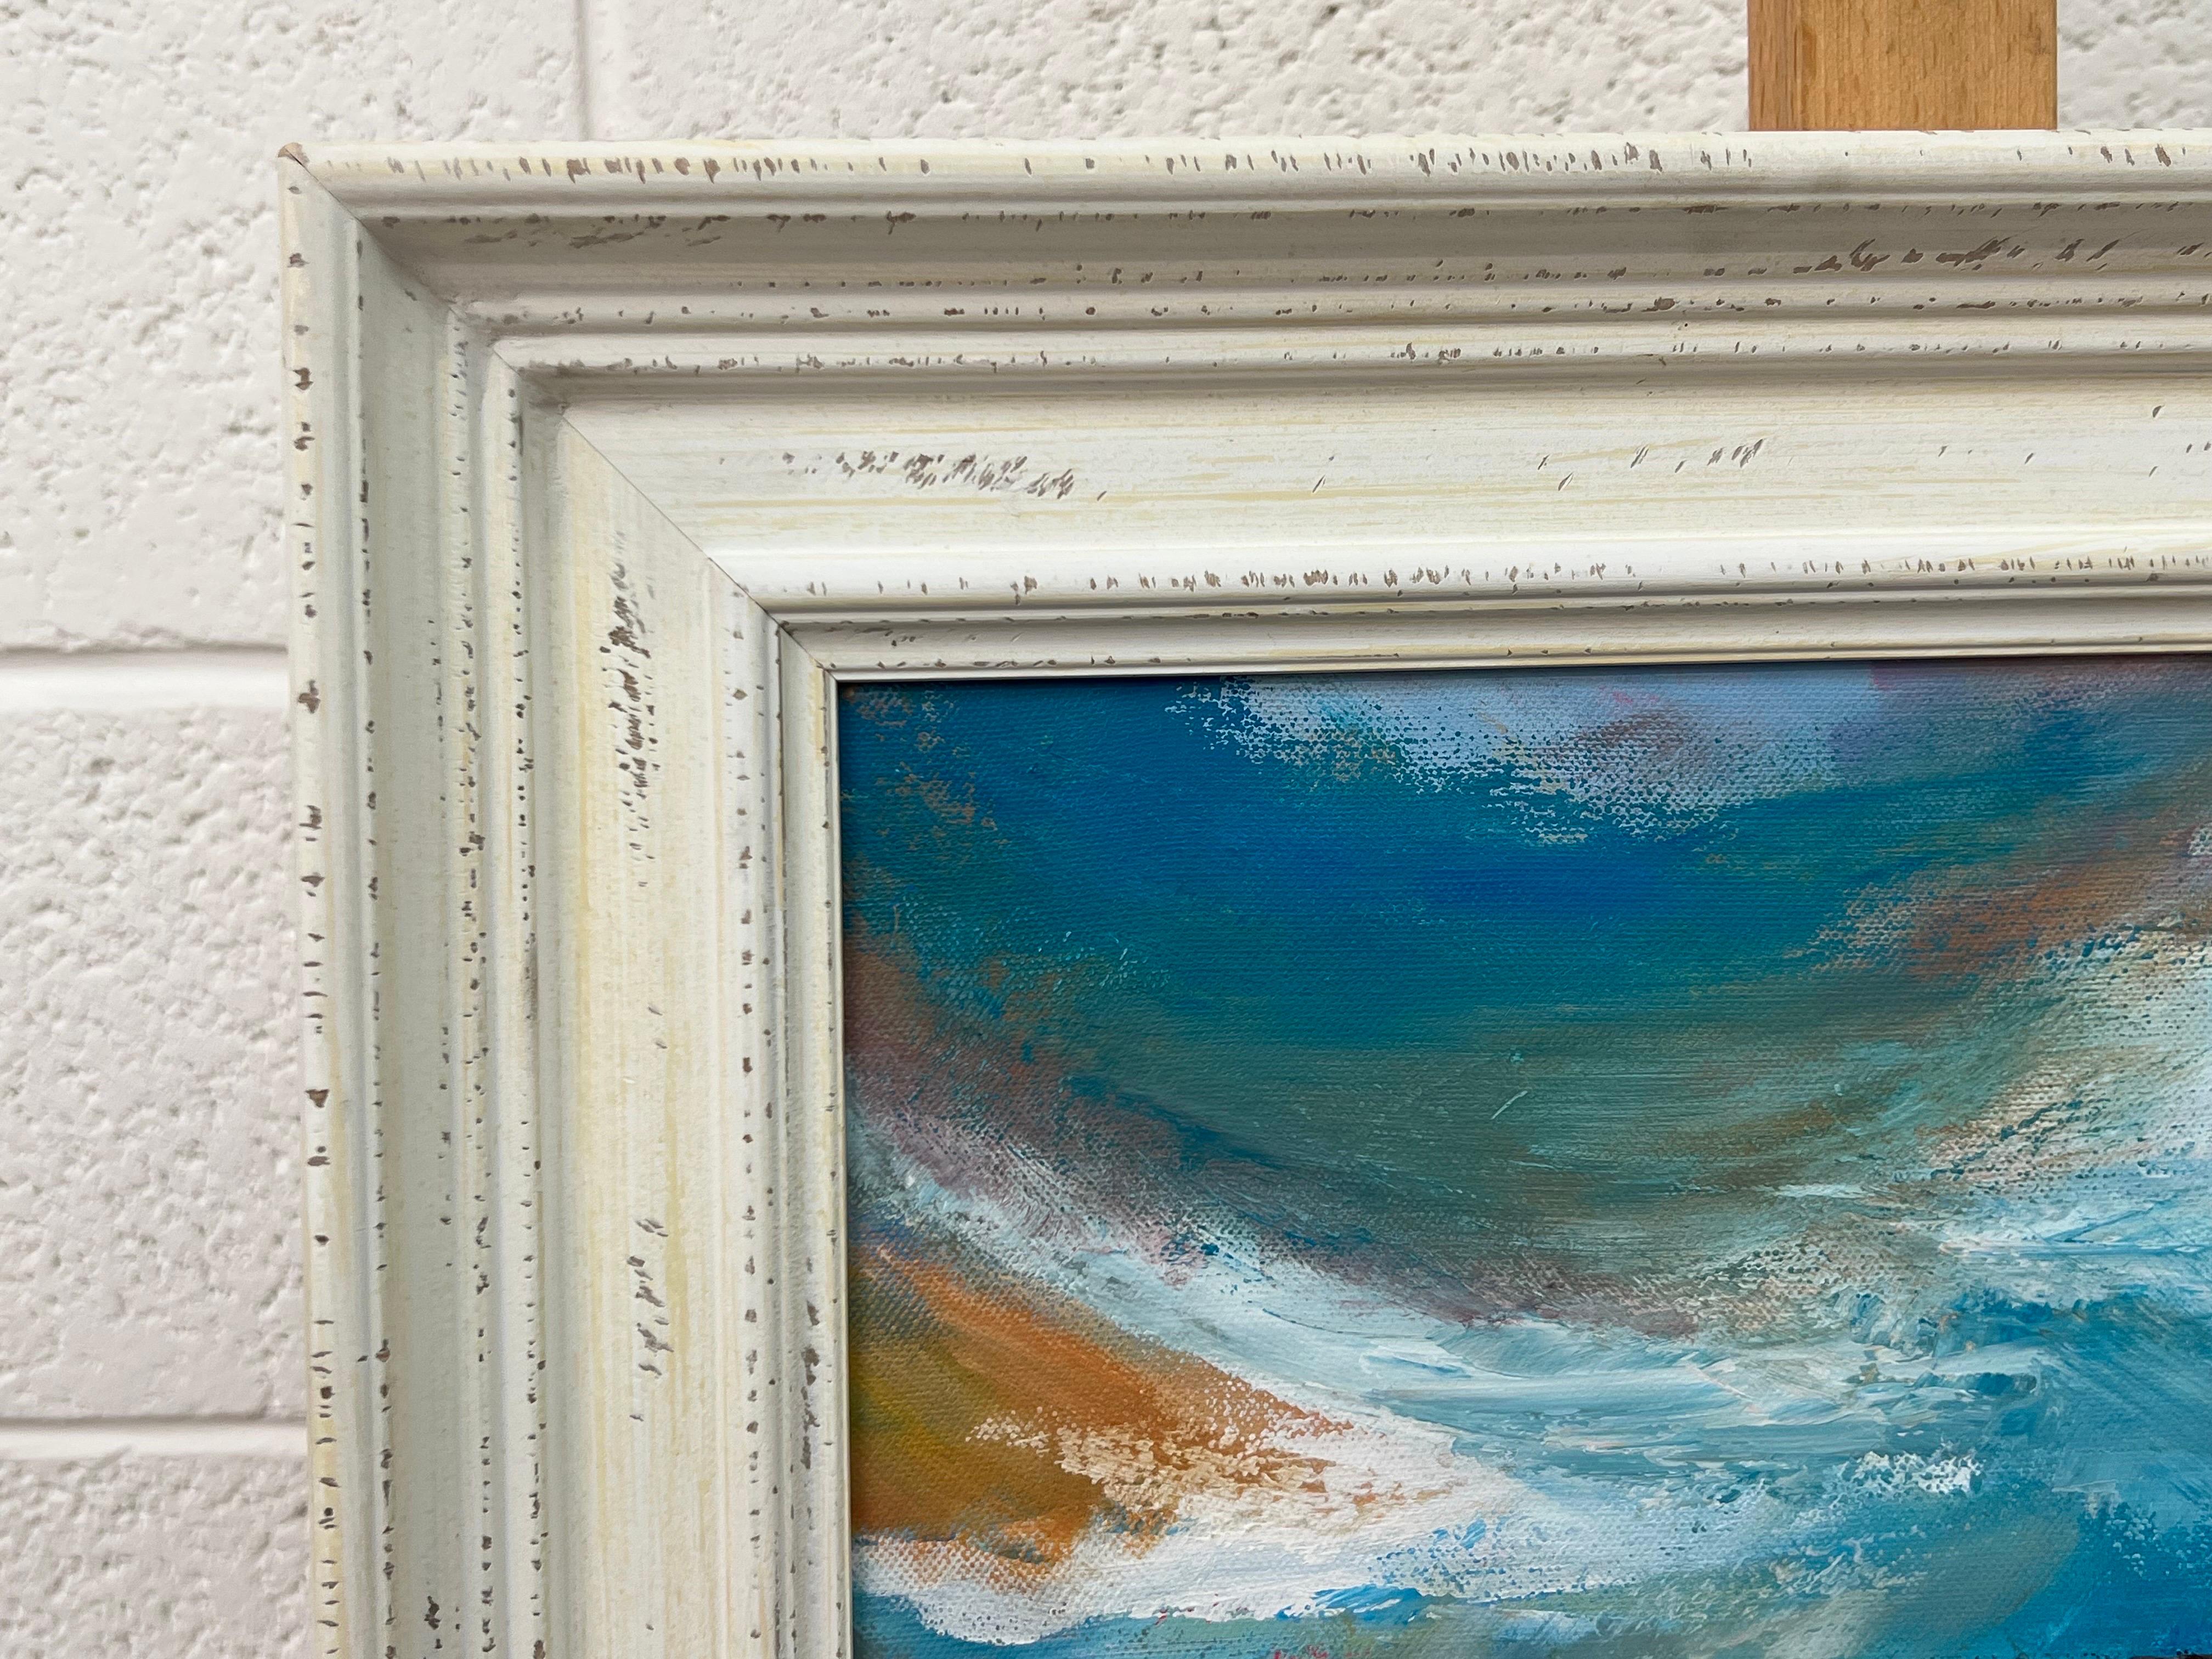 Expressive Abstract Seascape Landscape Painting by Contemporary British Artist For Sale 9